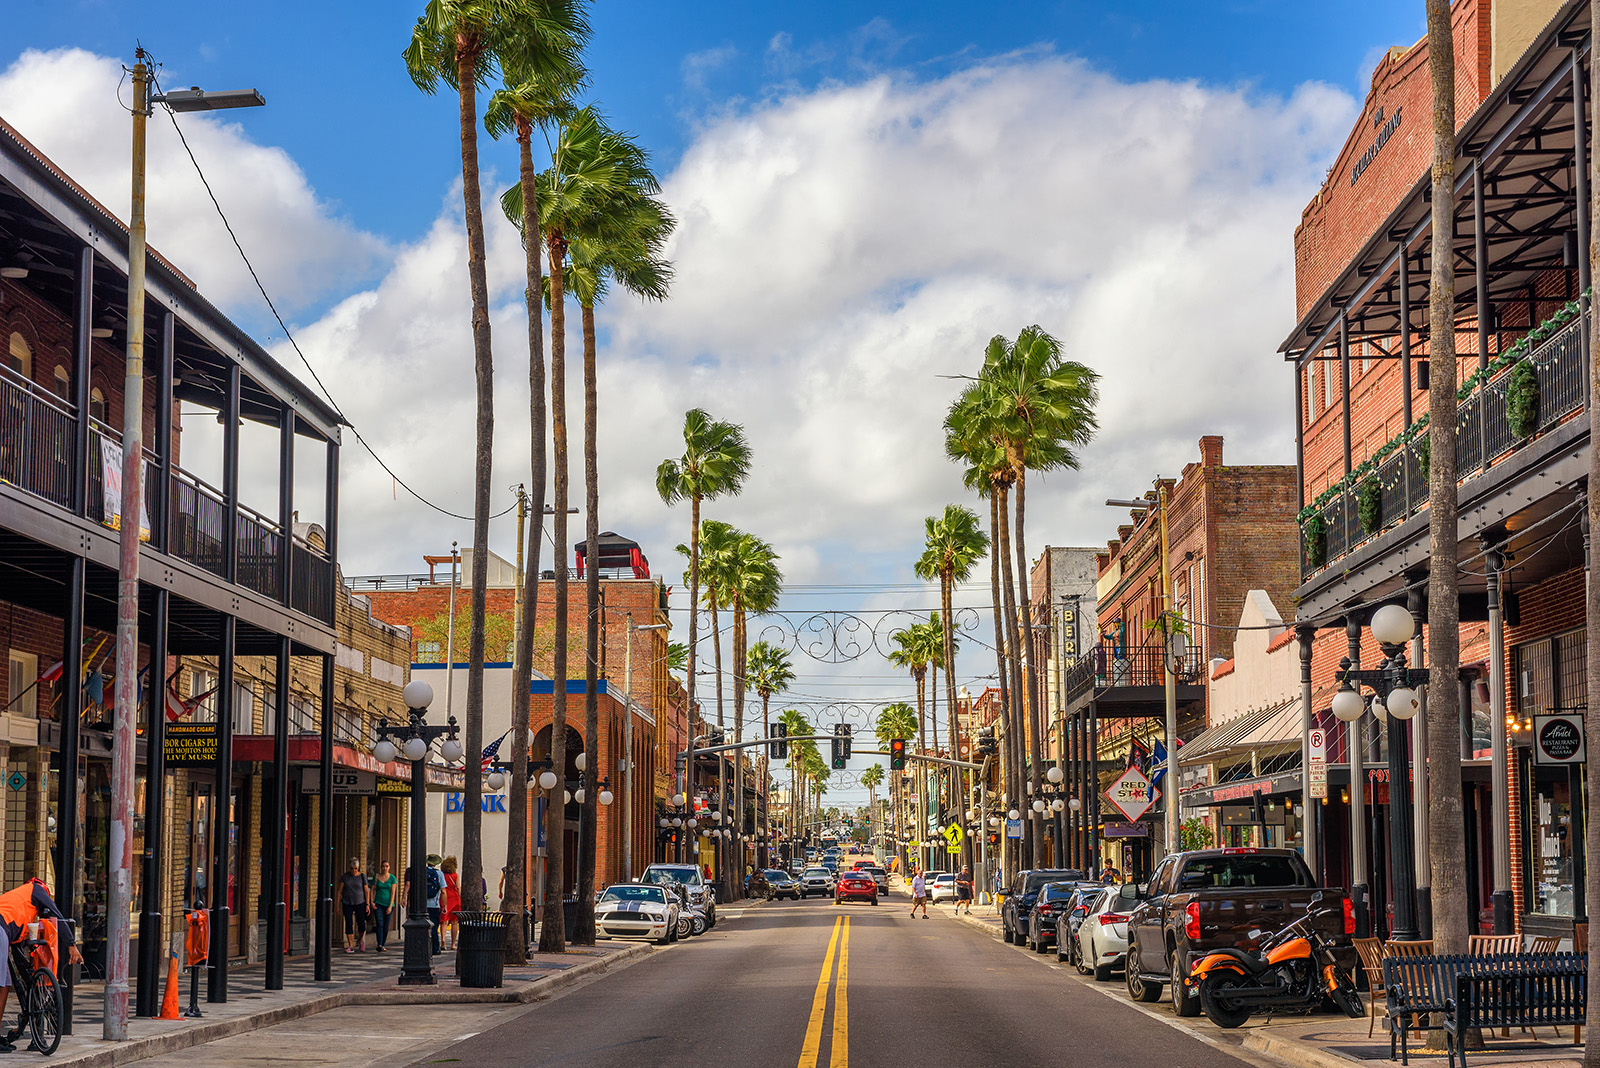 Mobile Tour: Go Back in Time and Visit Ybor City, the Cigar Capital of the World